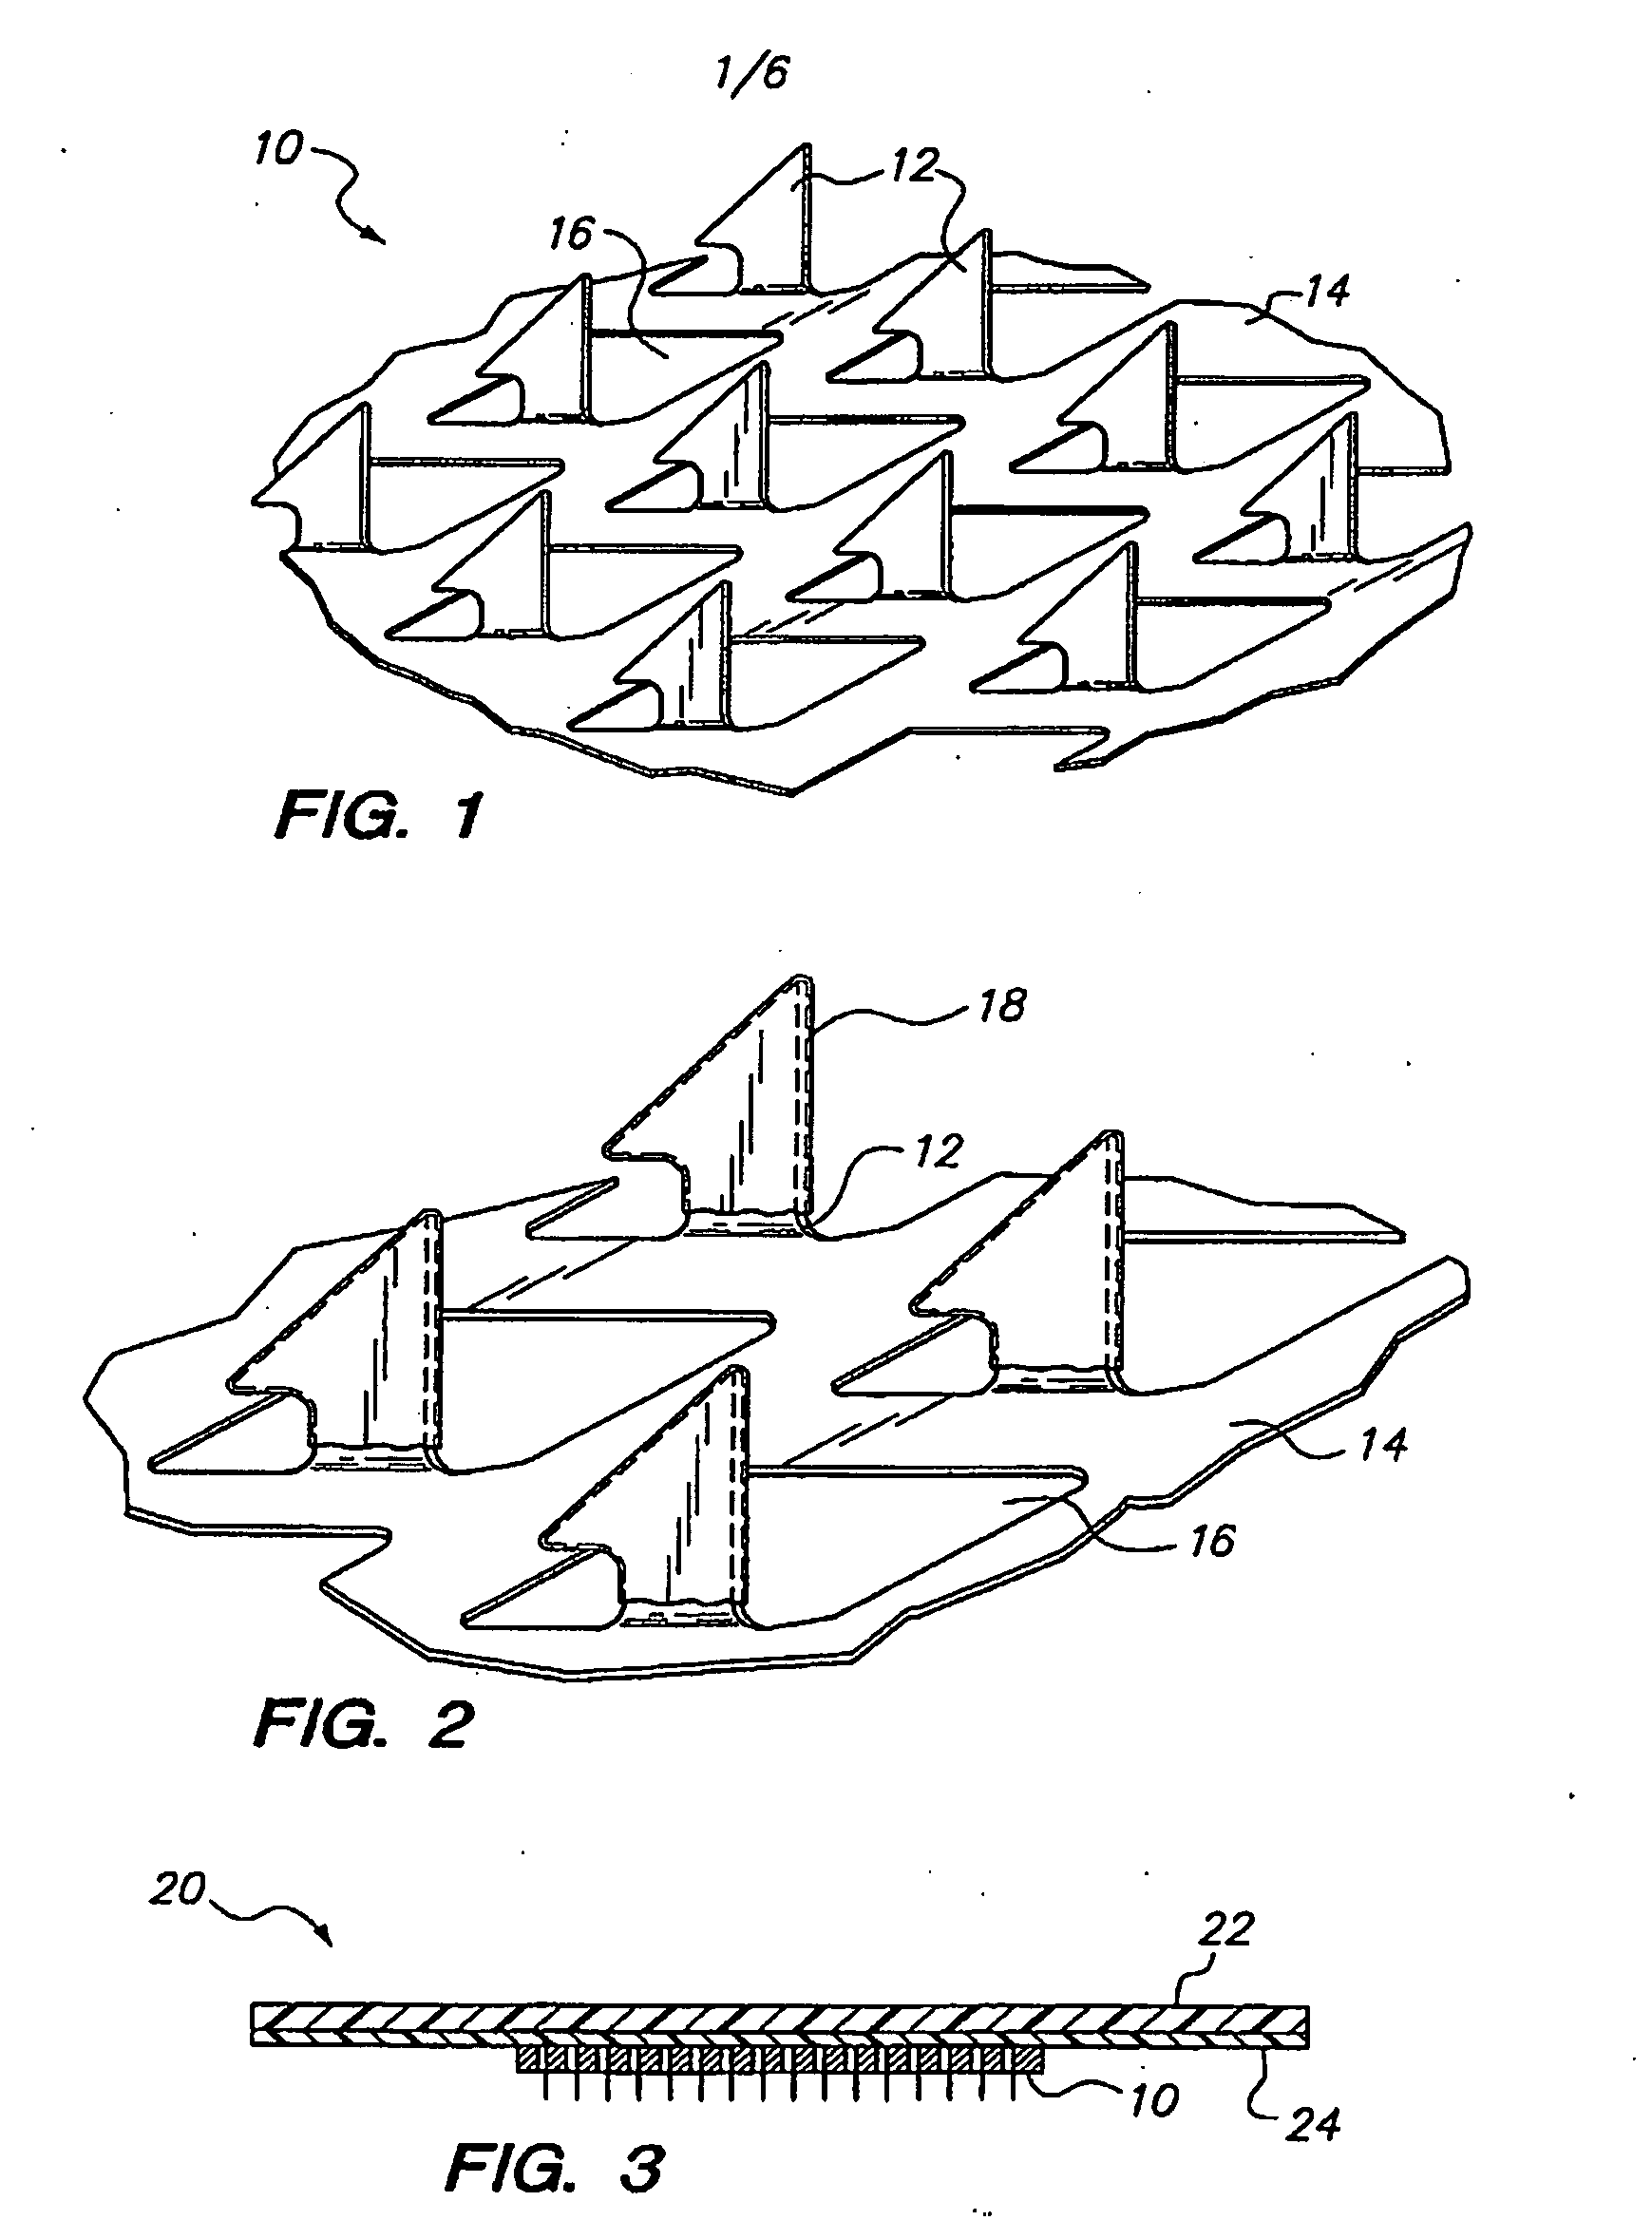 Microprojection Array Immunization Patch and Method